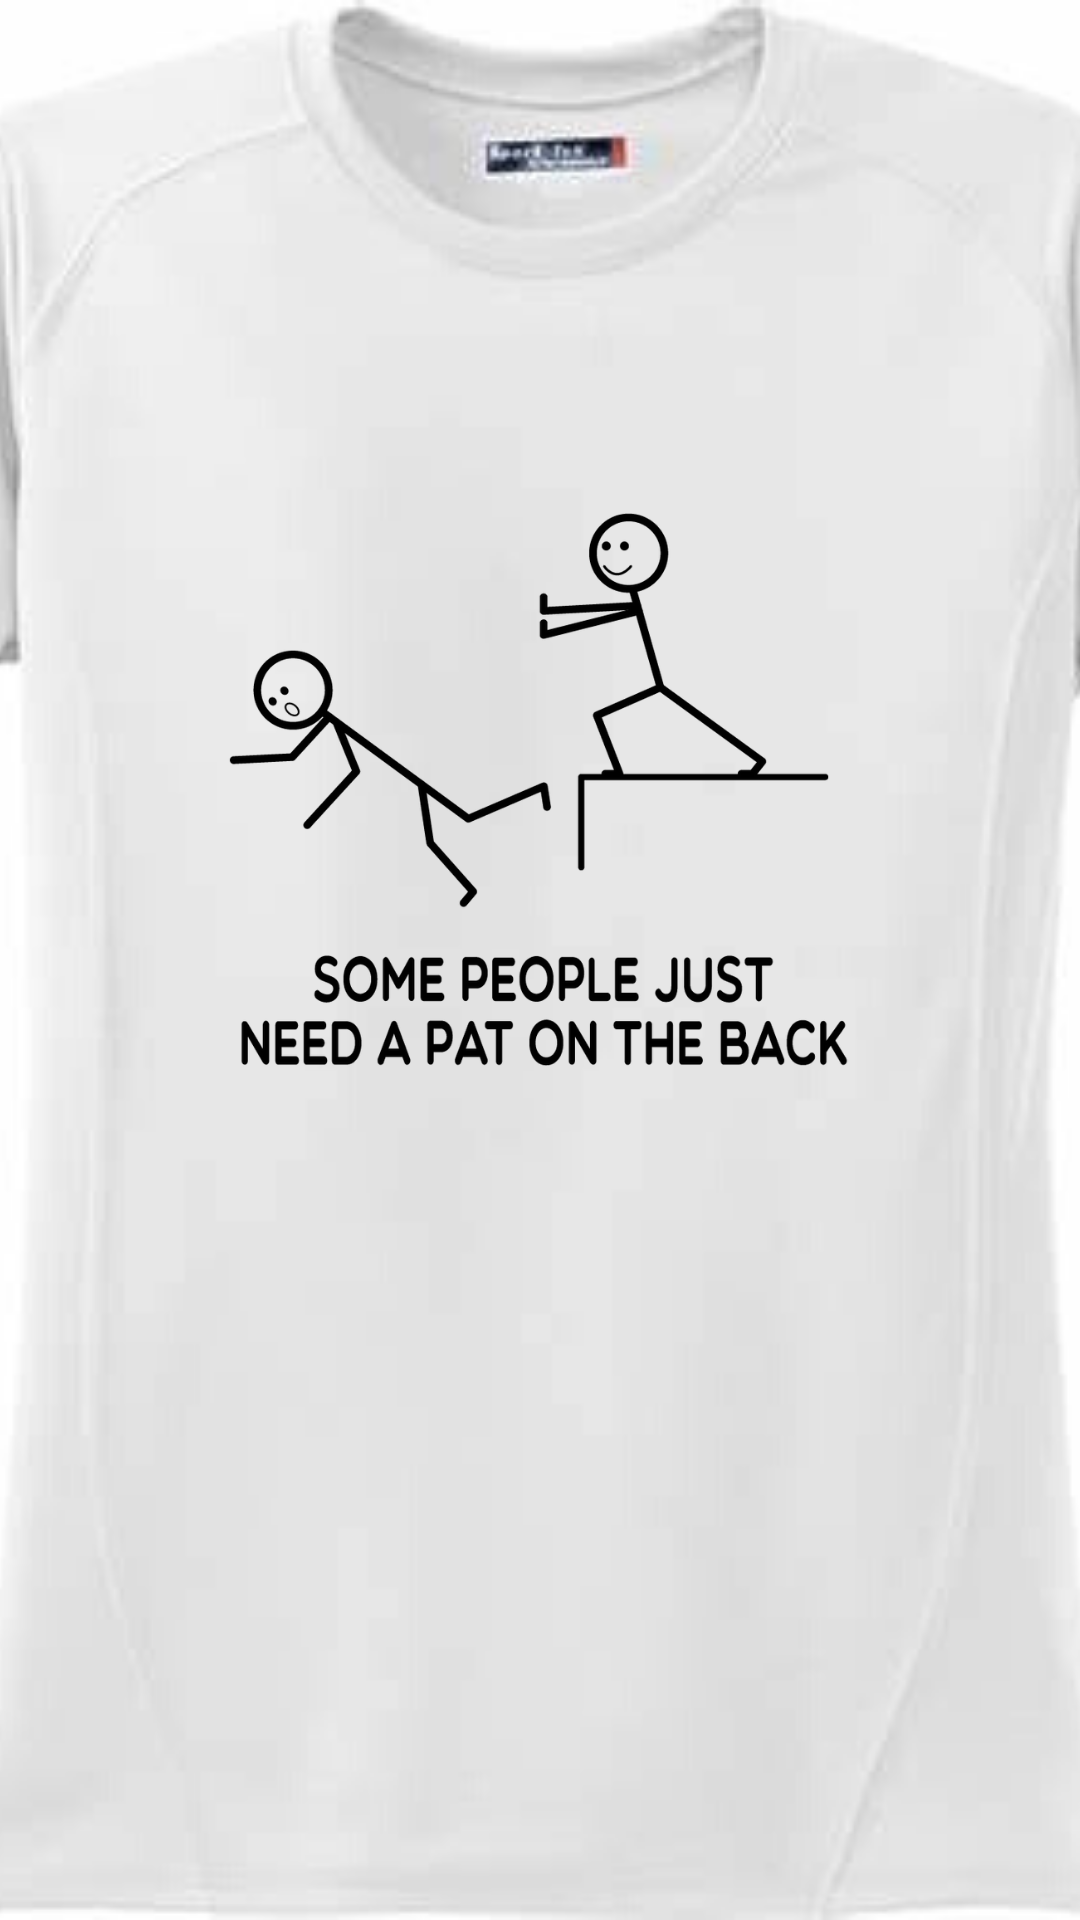 Buy 2+ Get 30% OFF Some People Just Need A Pat On The Back Unisex T-shirt Hilarious Shirt Humor Shirt Sarcastic Shirt